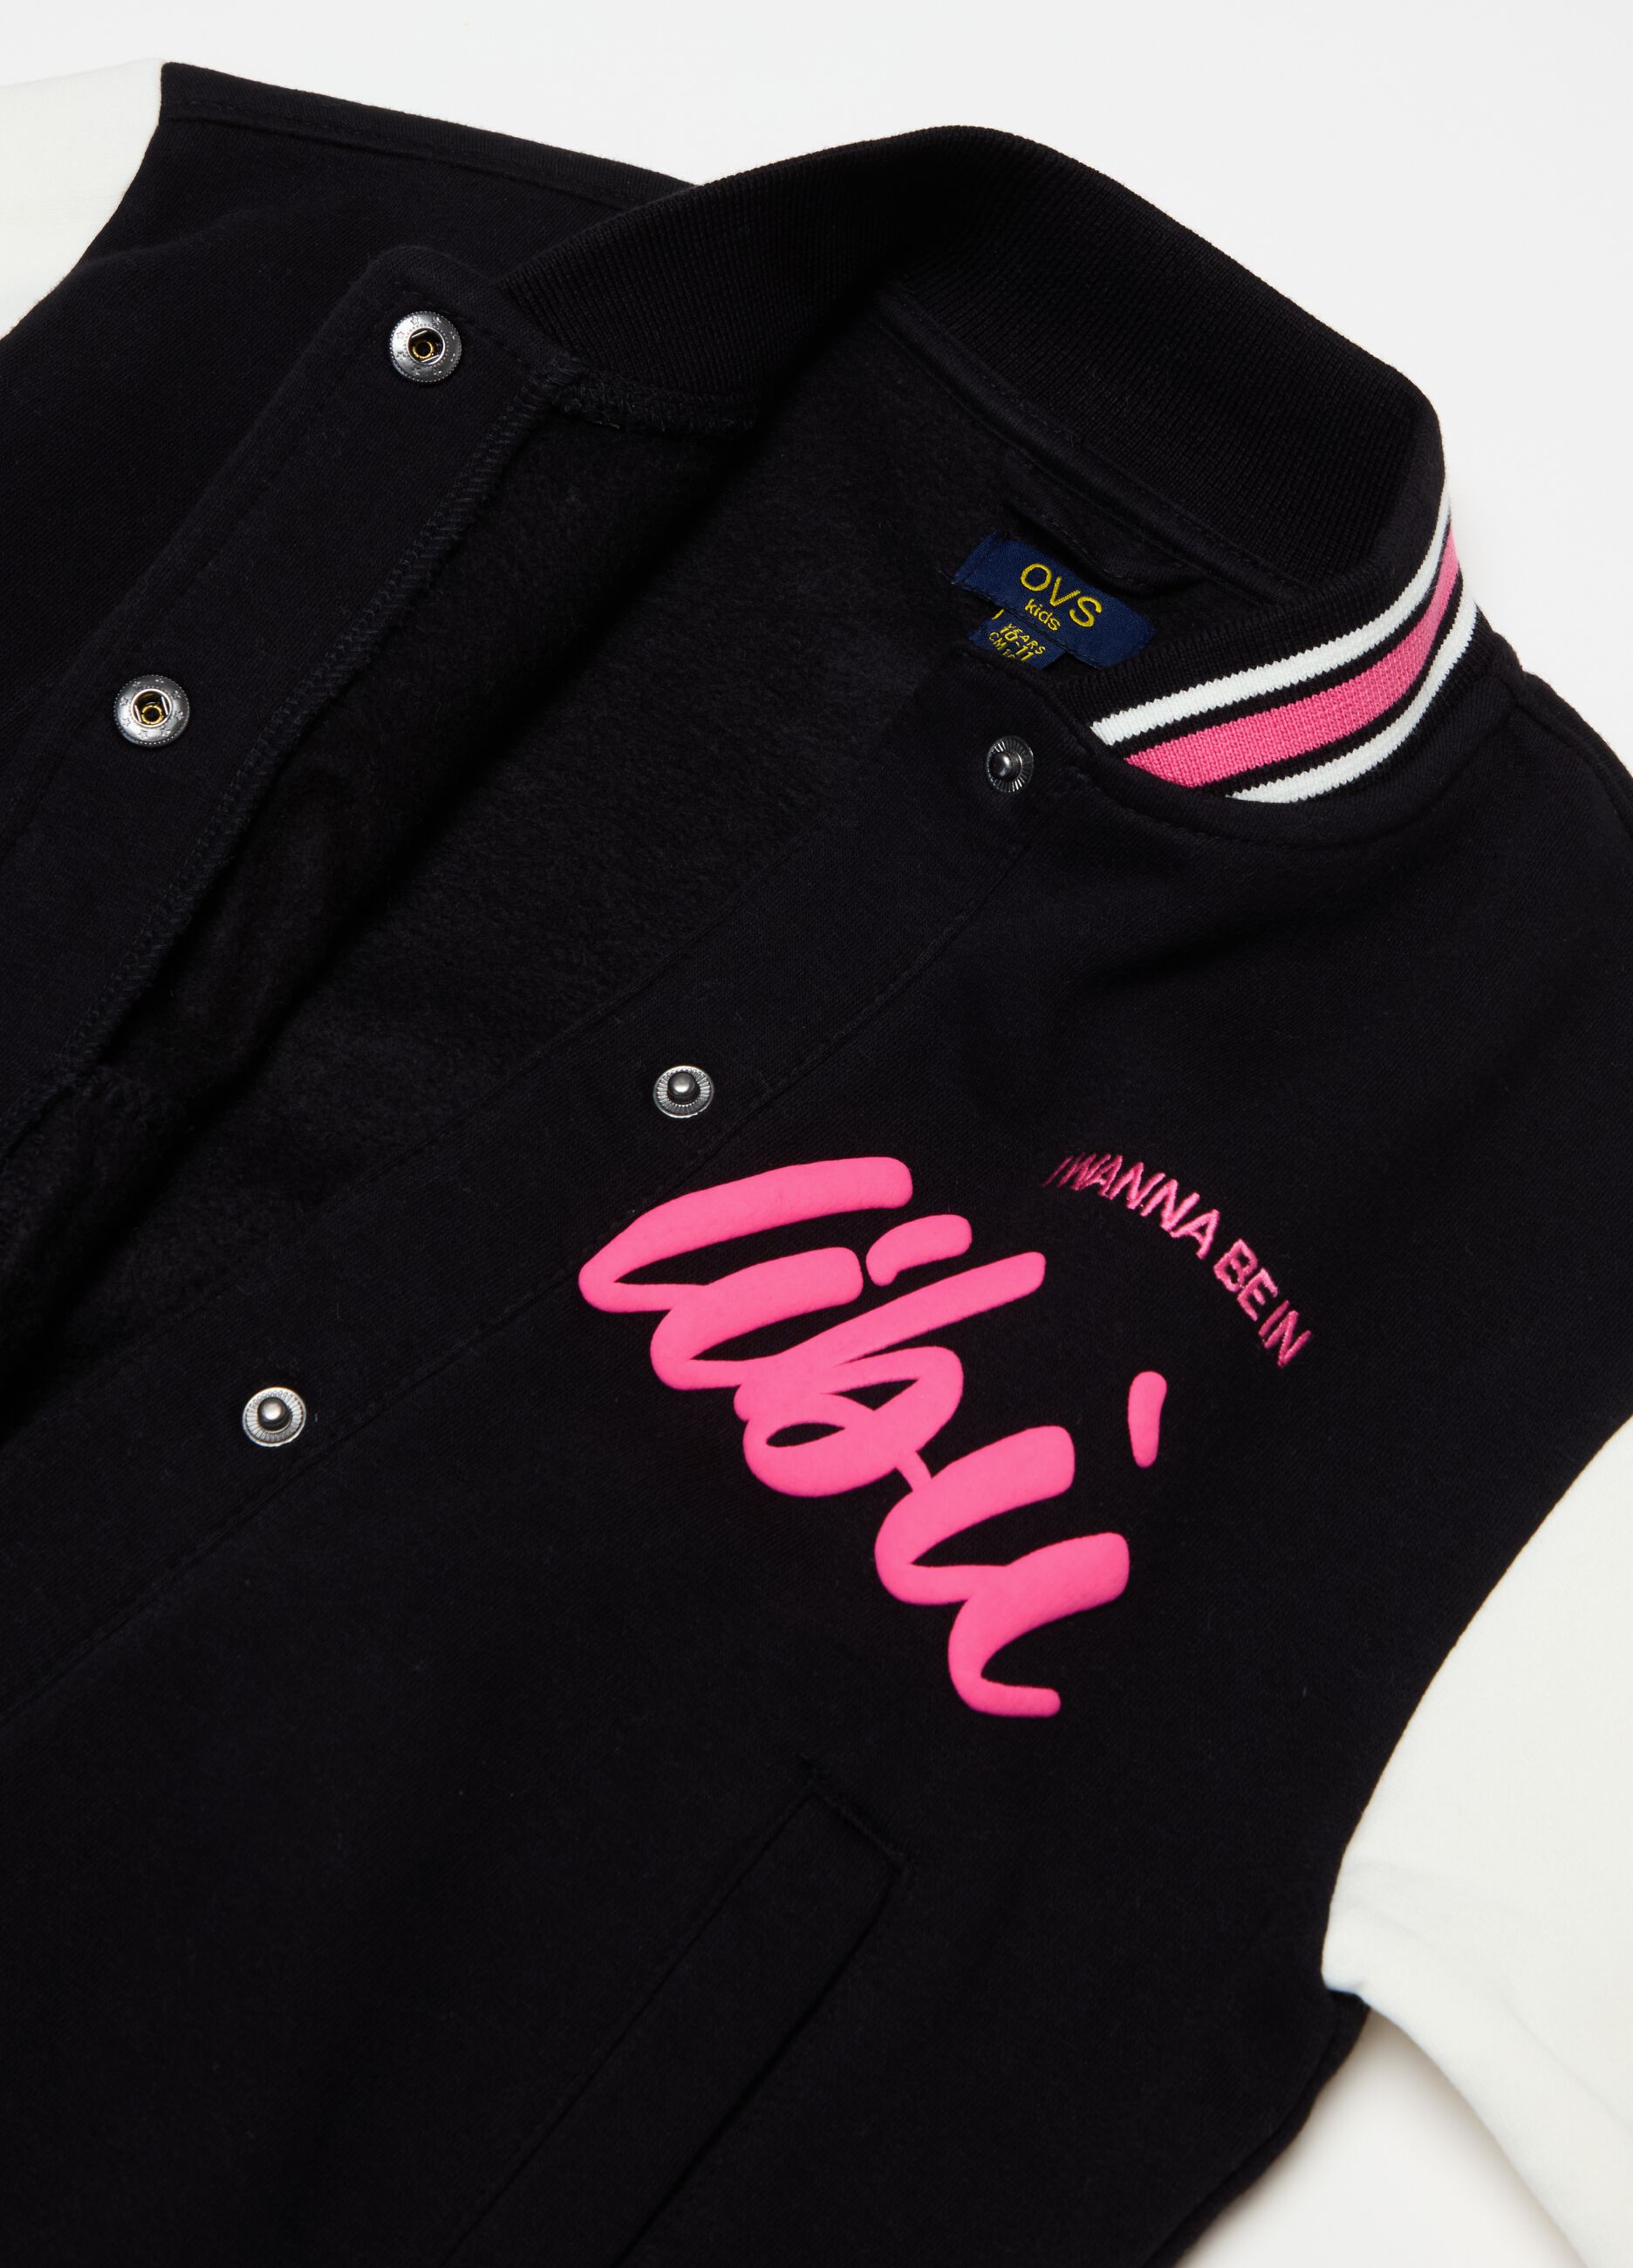 Varsity bomber jacket with print and embroidery